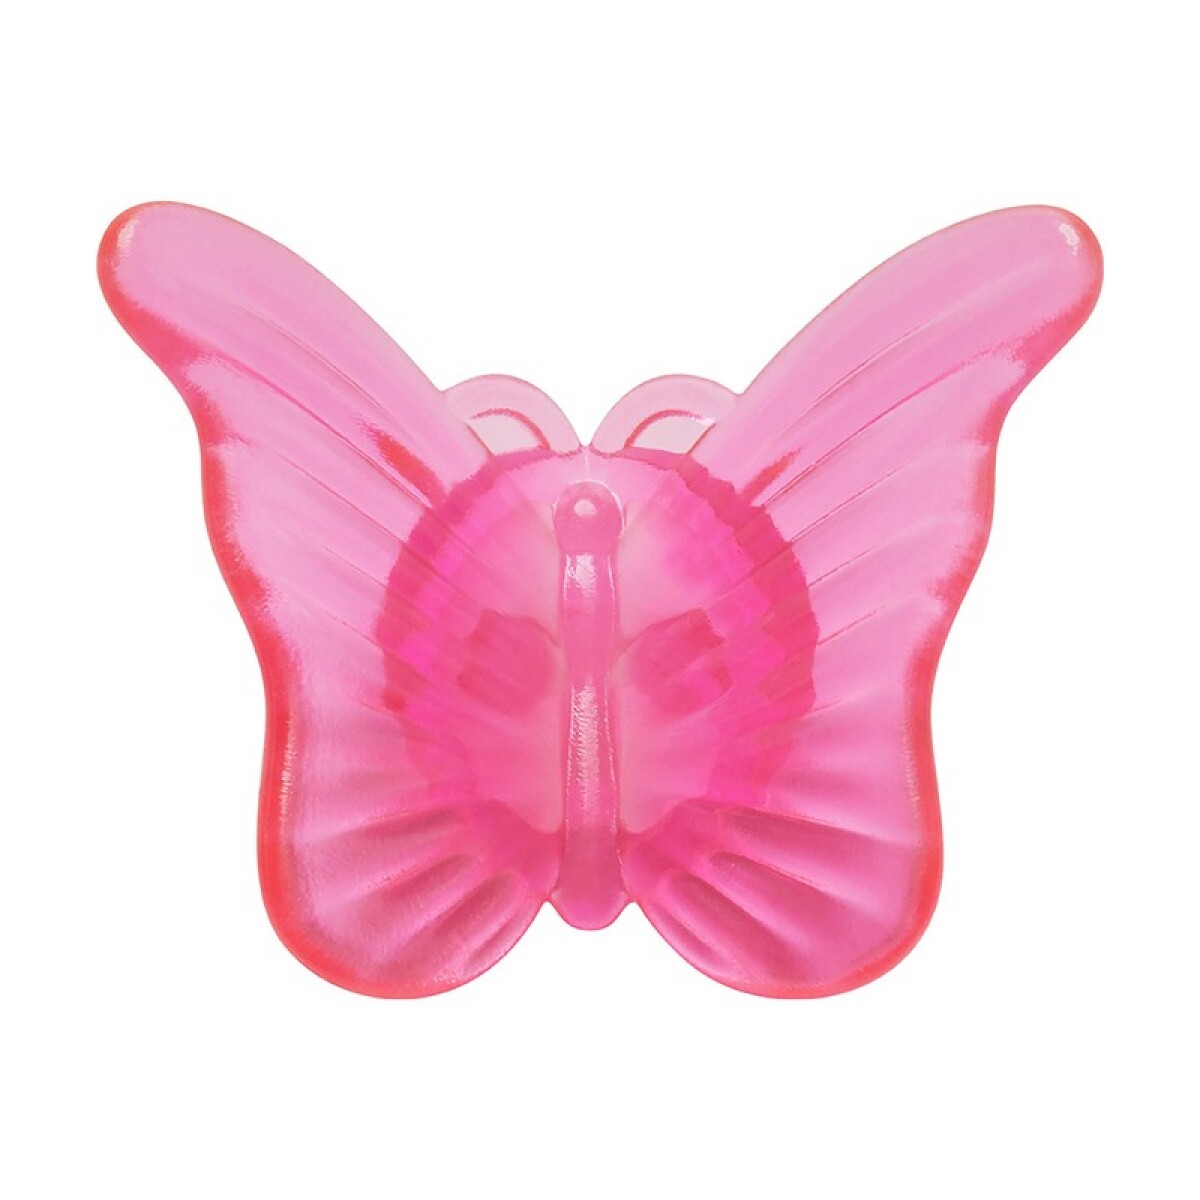 Jibbitz™ Charm Pink Butterfly Clip - Multicolor 